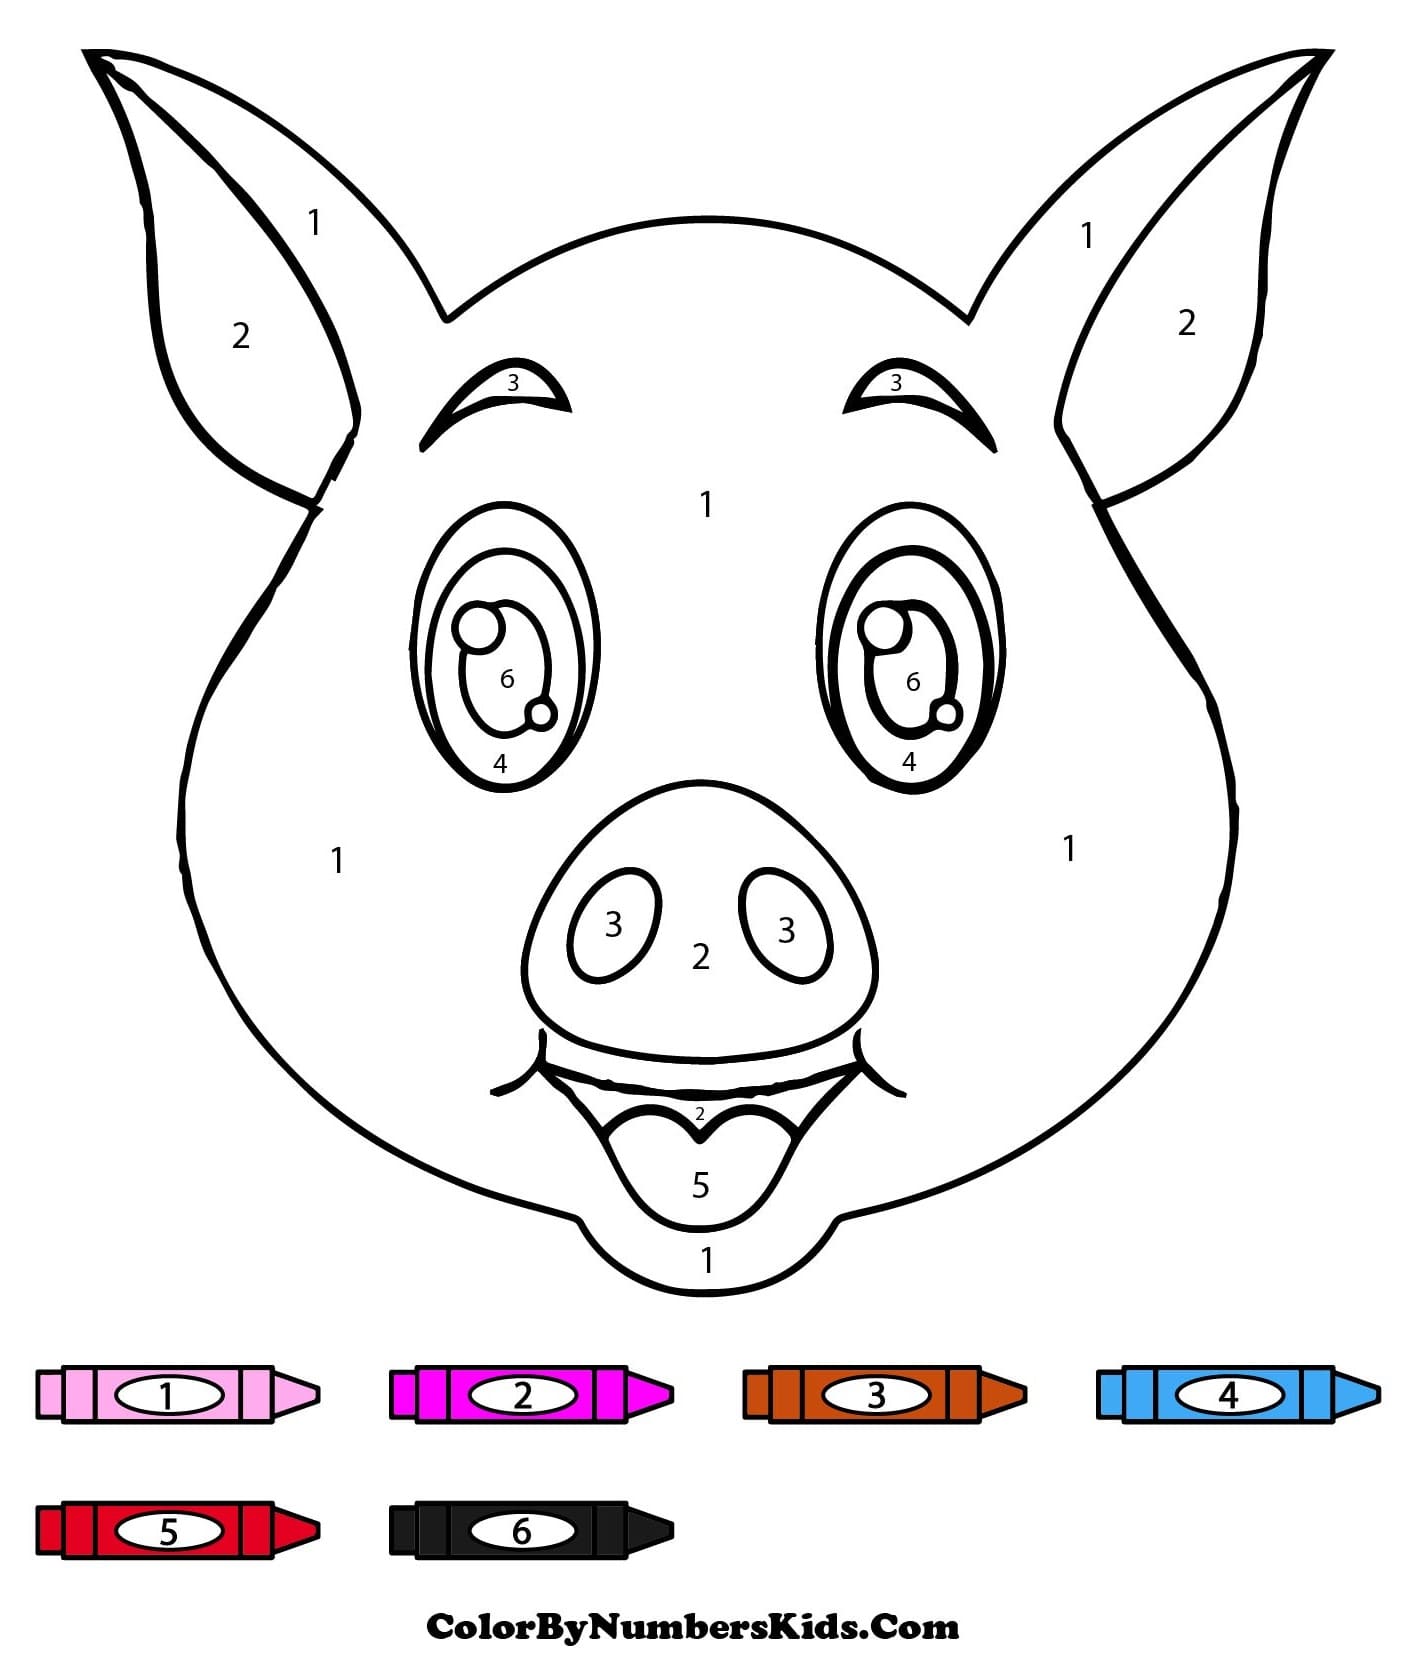 A Pig Face Color By Number